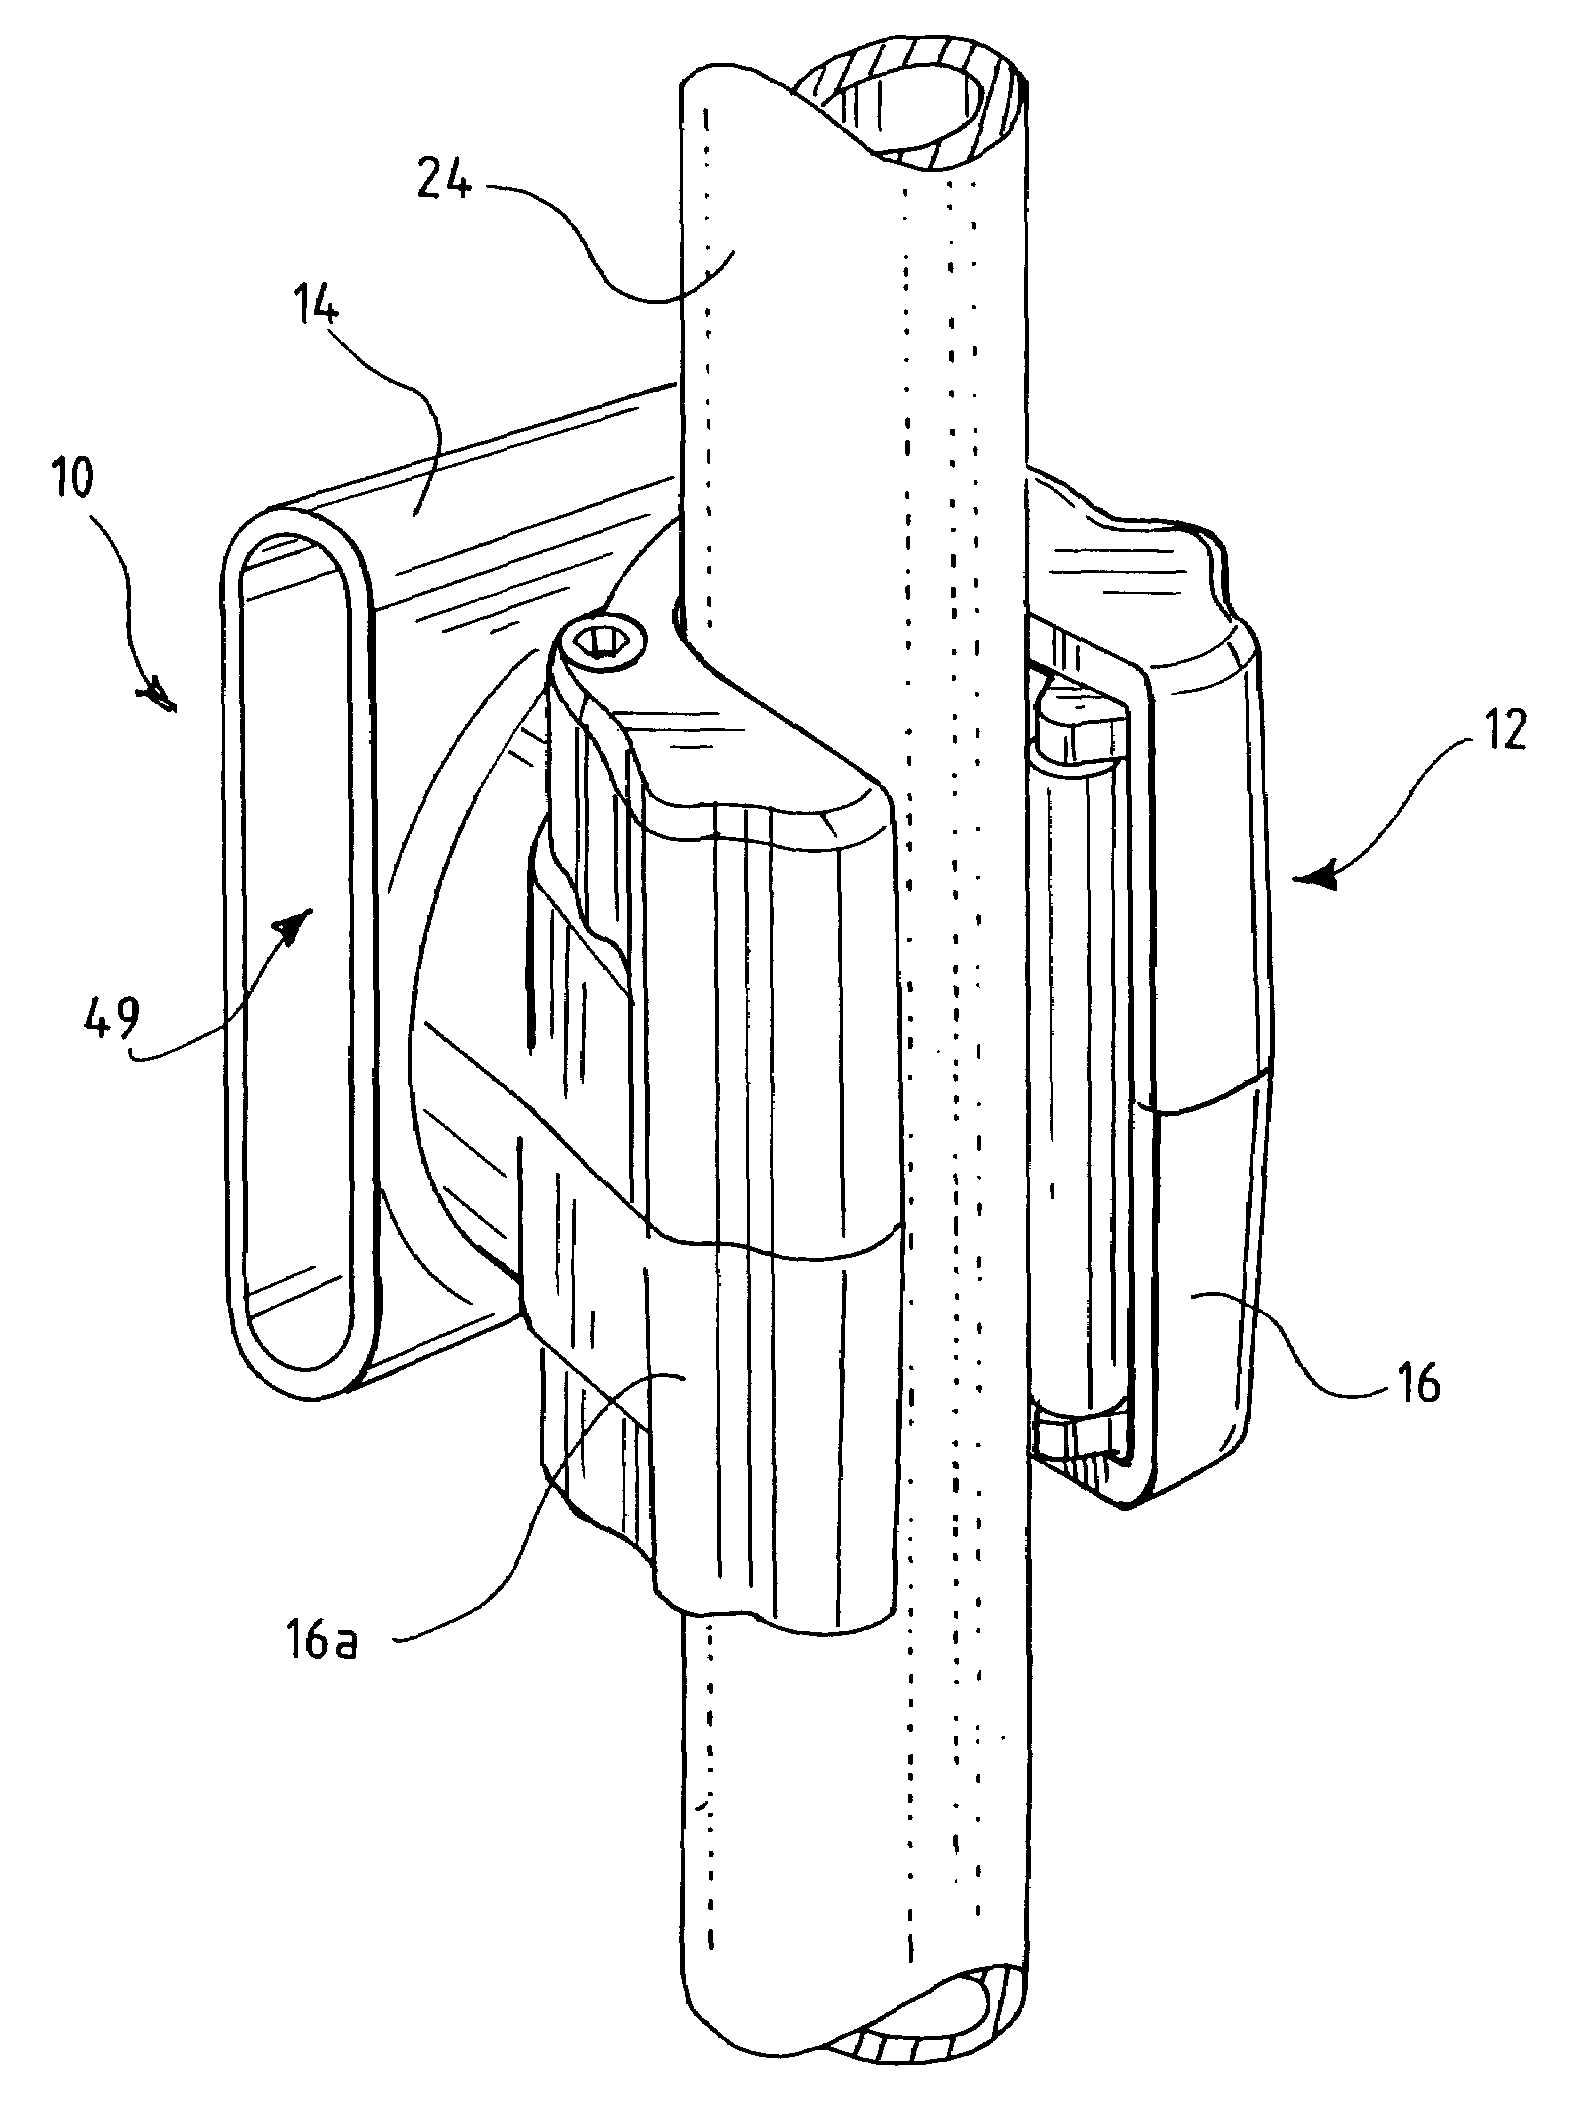 Baton scabbard with roller clamp retention